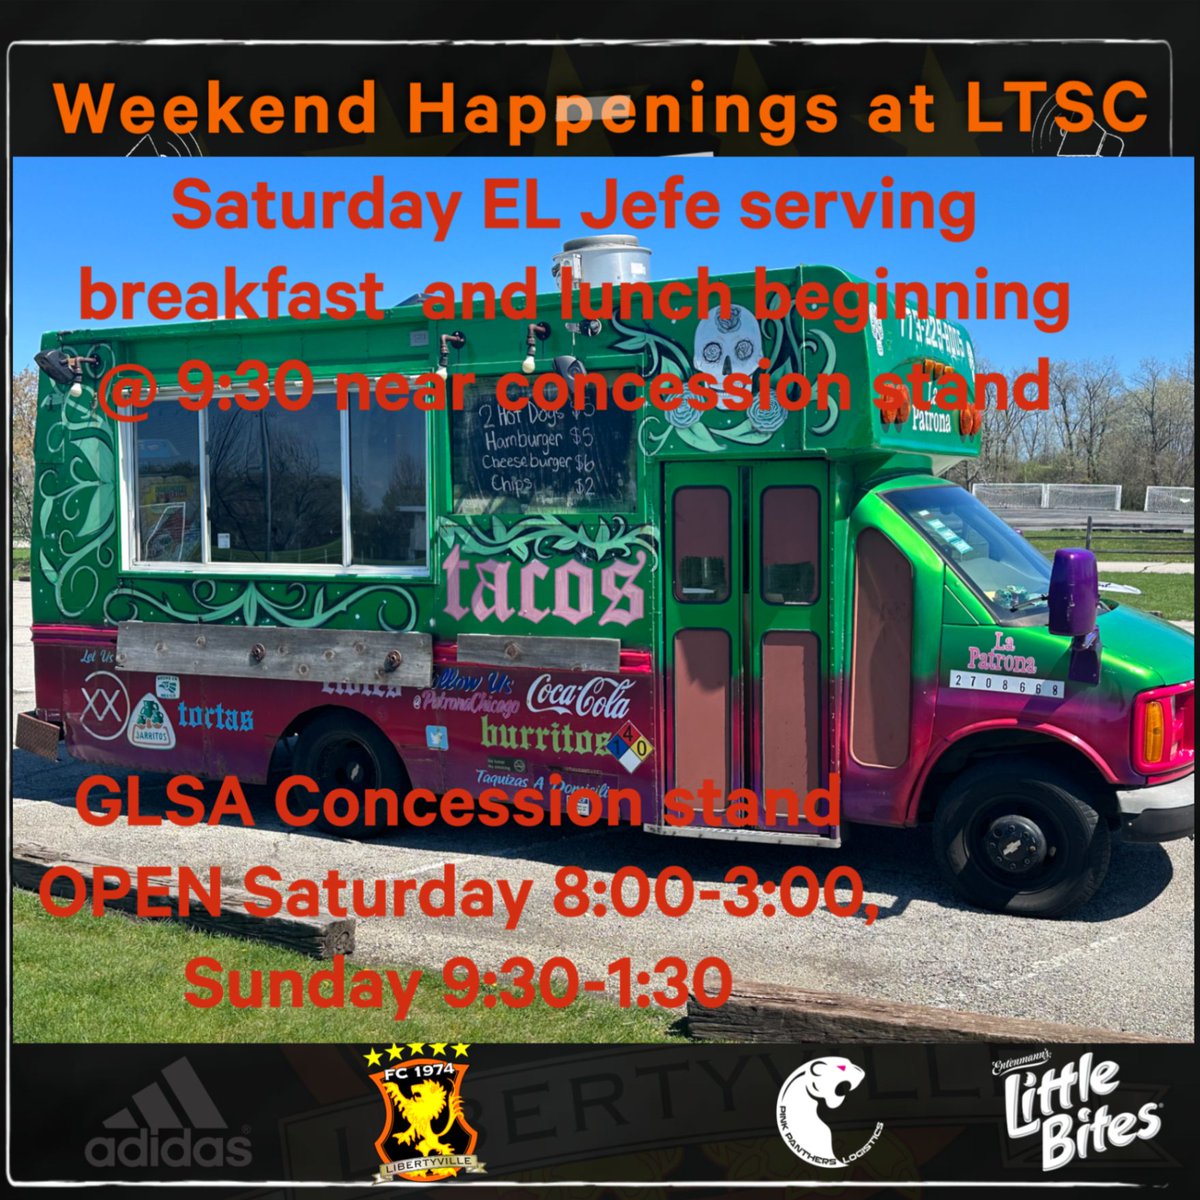 Join us this weekend at our concession stand - OPEN Saturday and Sunday - El Jefe serving breakfast and lunch Saturday, beginning at 9:30am. #weare74